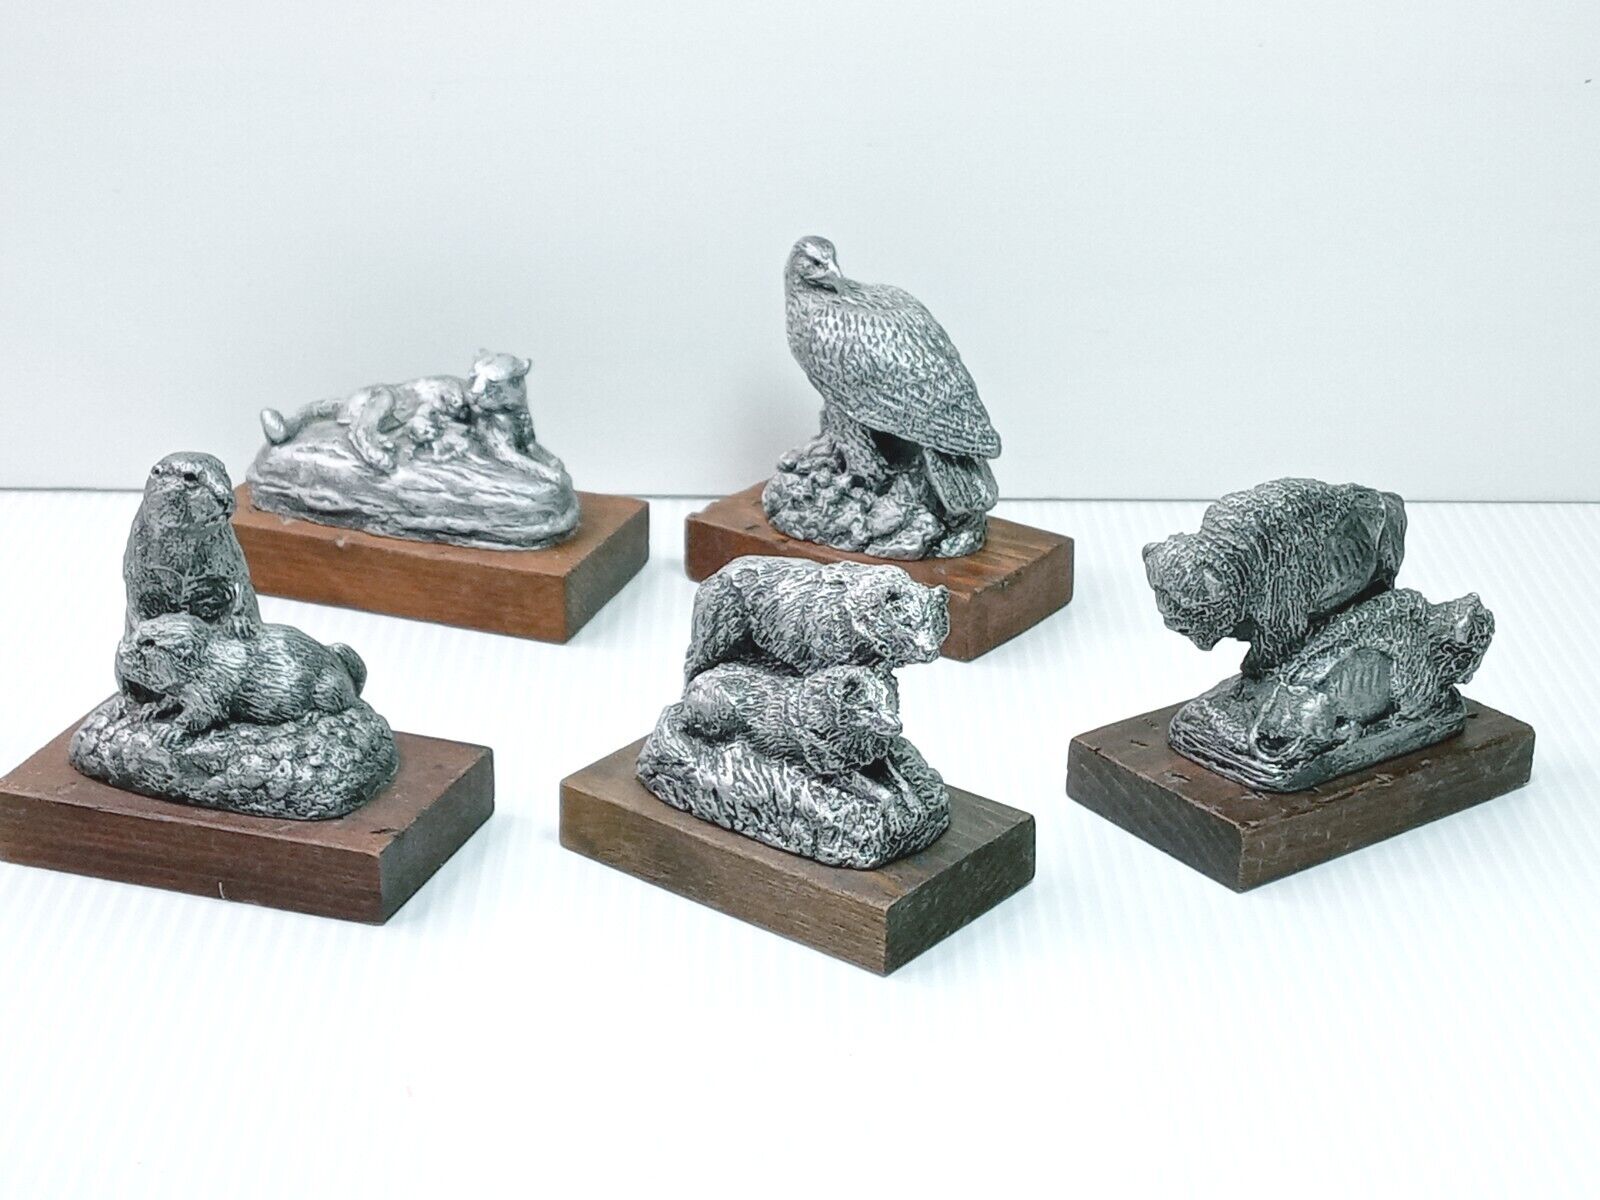  DEATON MUSEUM PEWTER WILD ANIMALS FIGURINES & WOOD BASE LOT OF 5